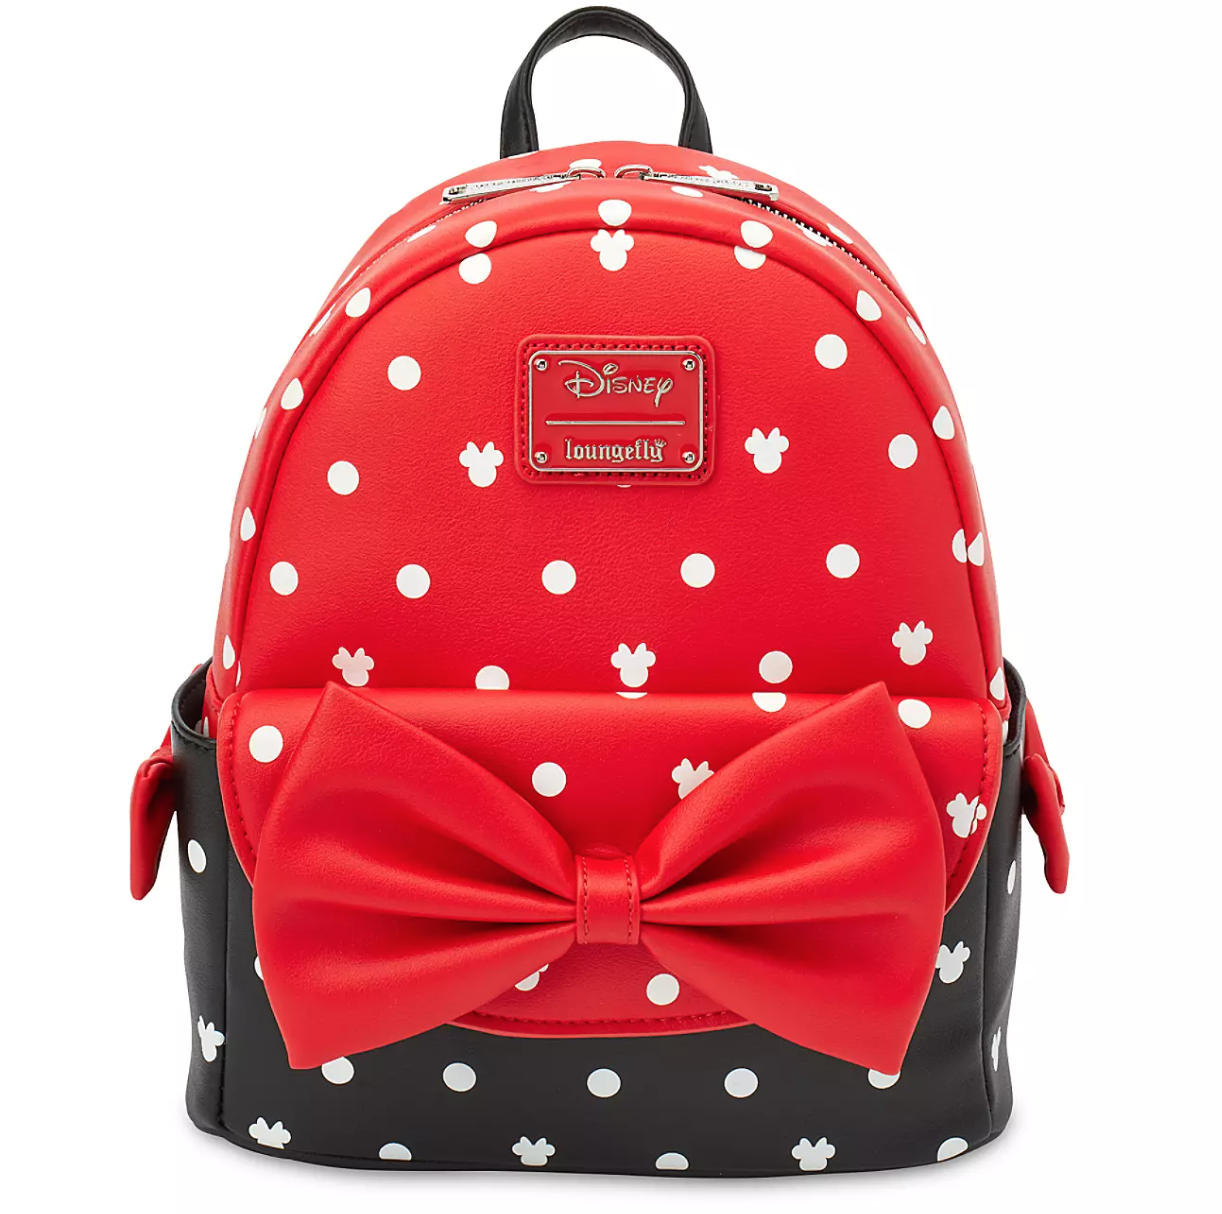 Mickey & Minnie Car Ride Loungefly Mini Backpack Exclusive!